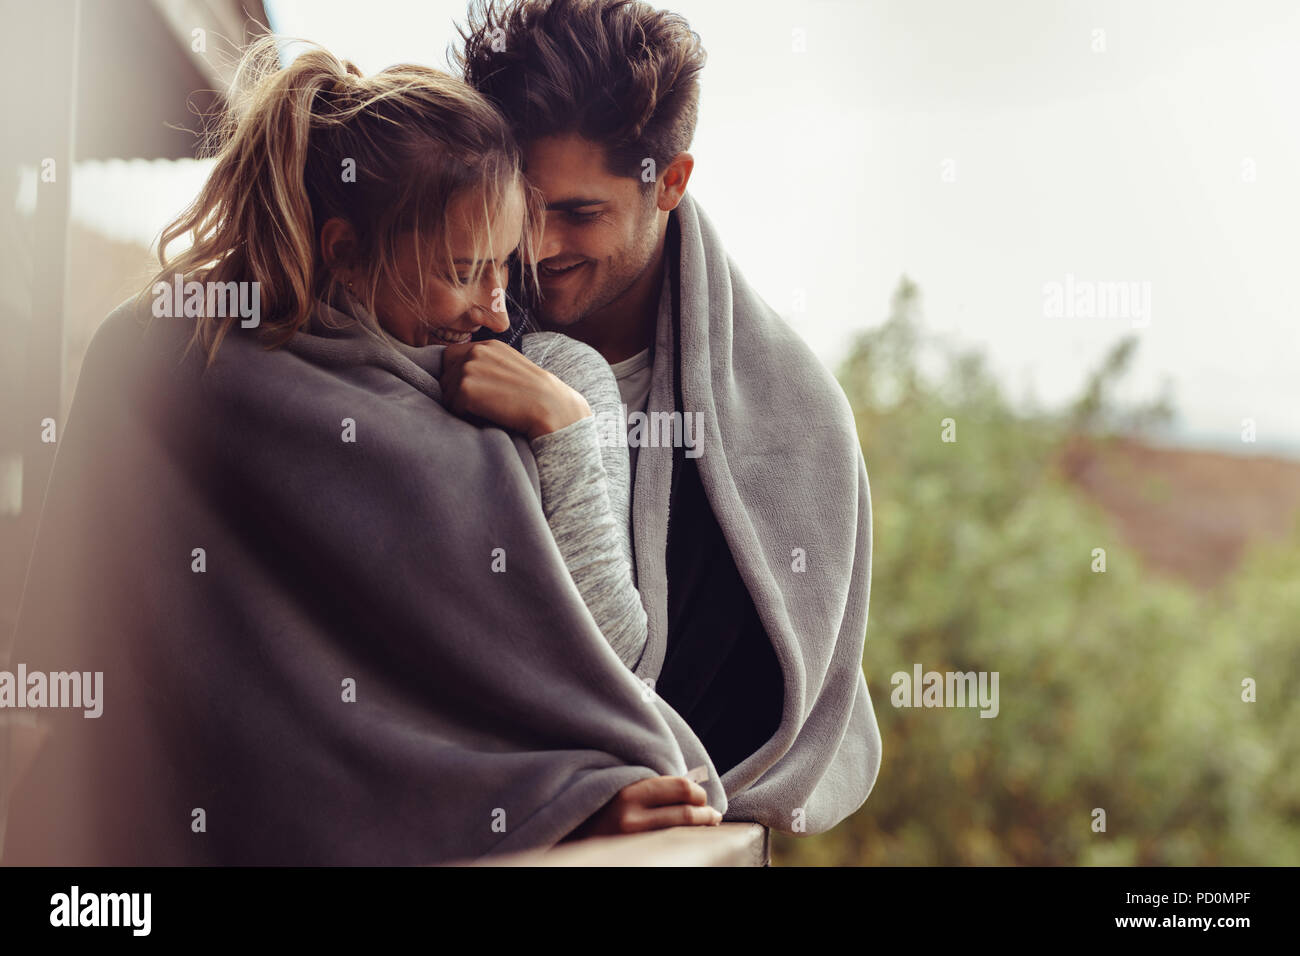 Romantic couple on a winter holiday. Man and woman standing together in a hotel room balcony wrapped in blanket. Couple embracing and smiling. Stock Photo